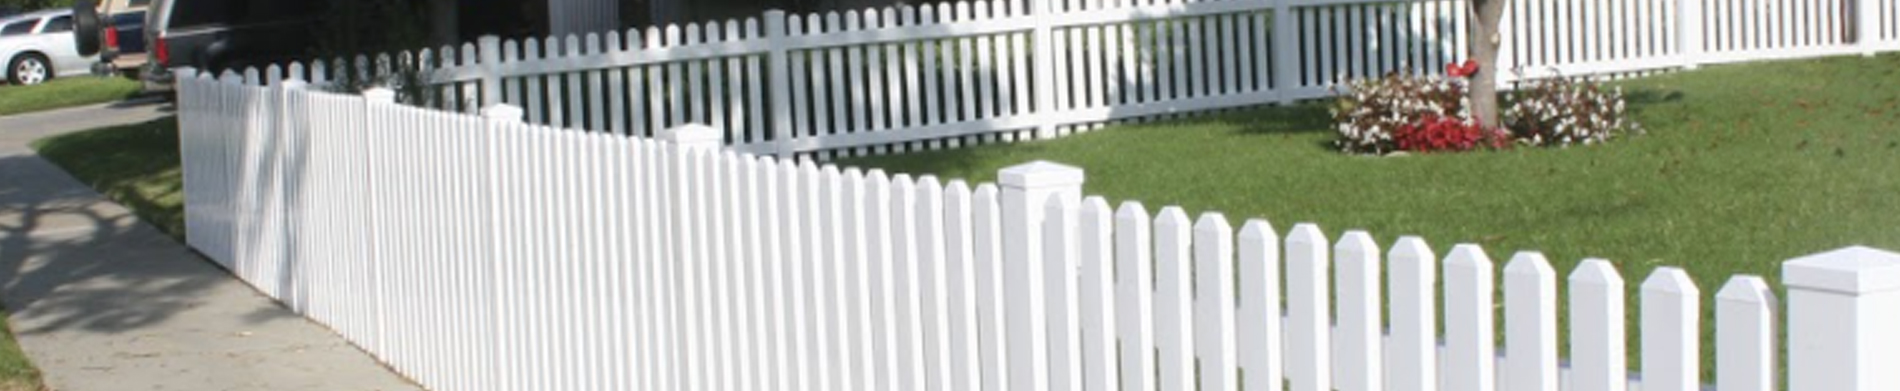 Installing a traditional vinyl fence around your property – Install beautiful Duramax fences